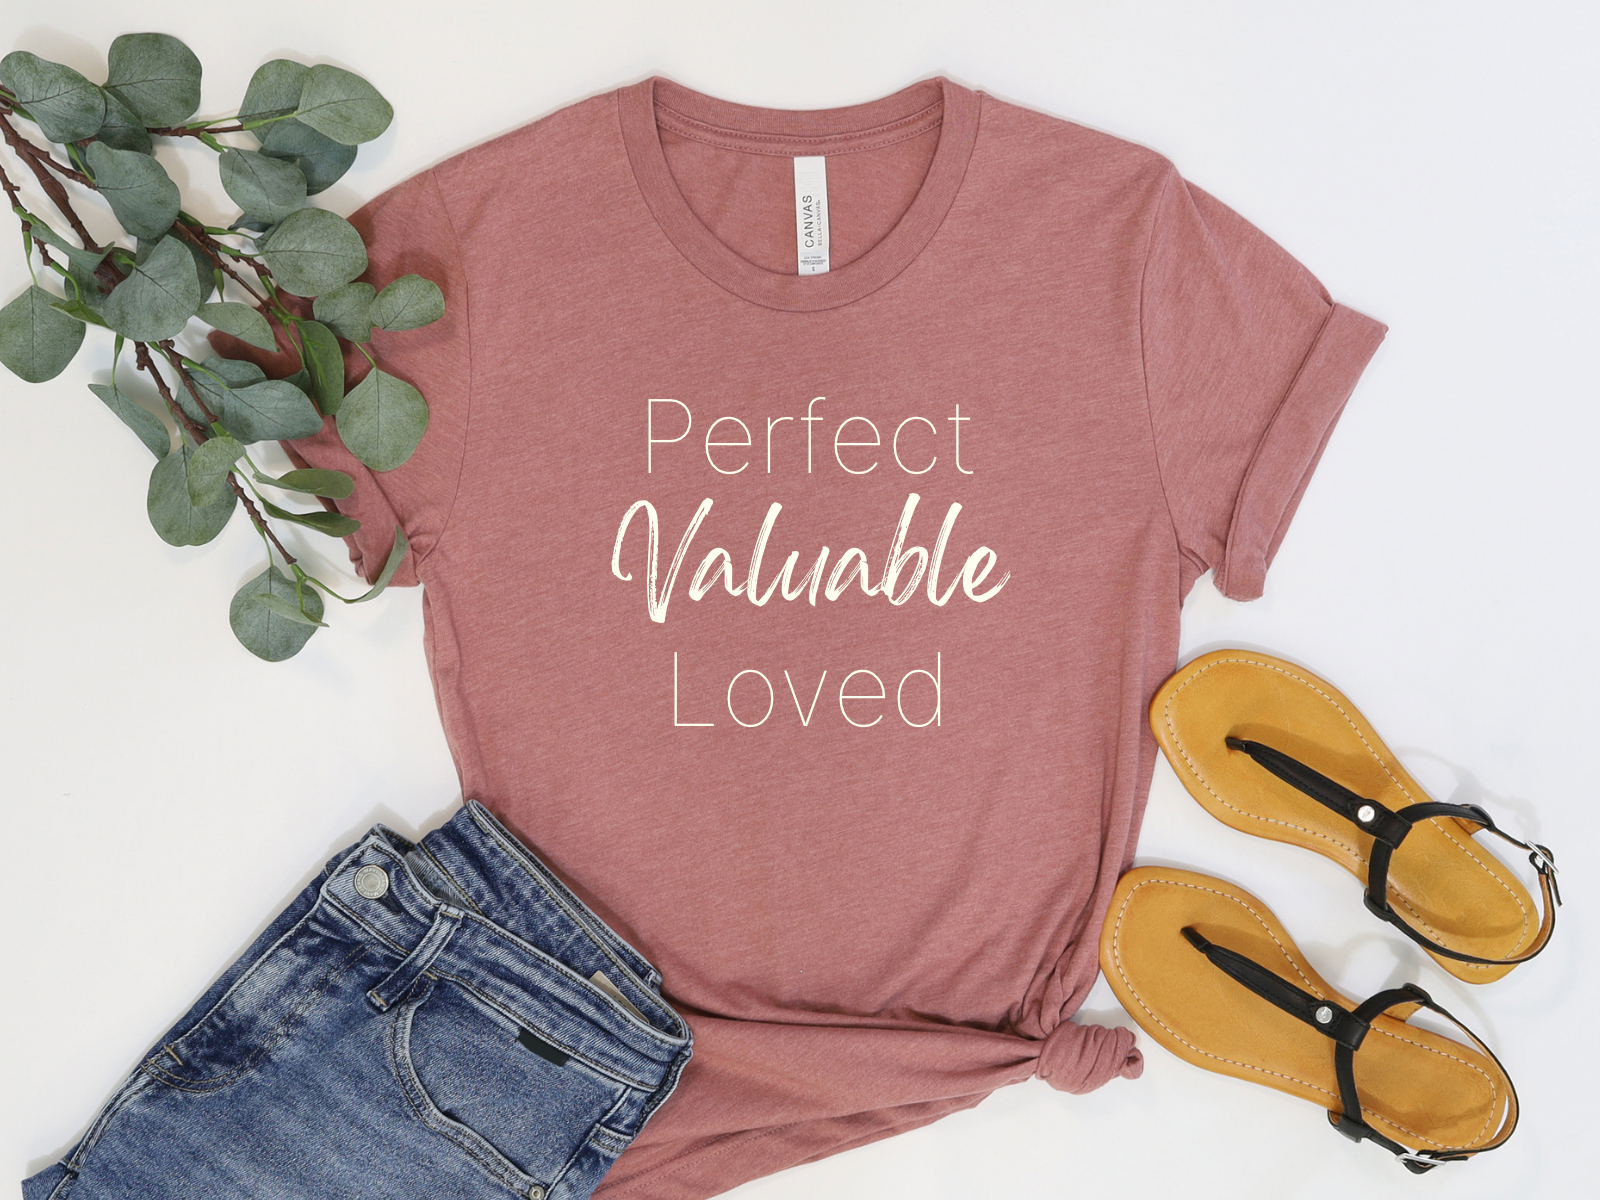 Broken Until Now Co Etsy Shop

Perfect, Valuable and Love shirt